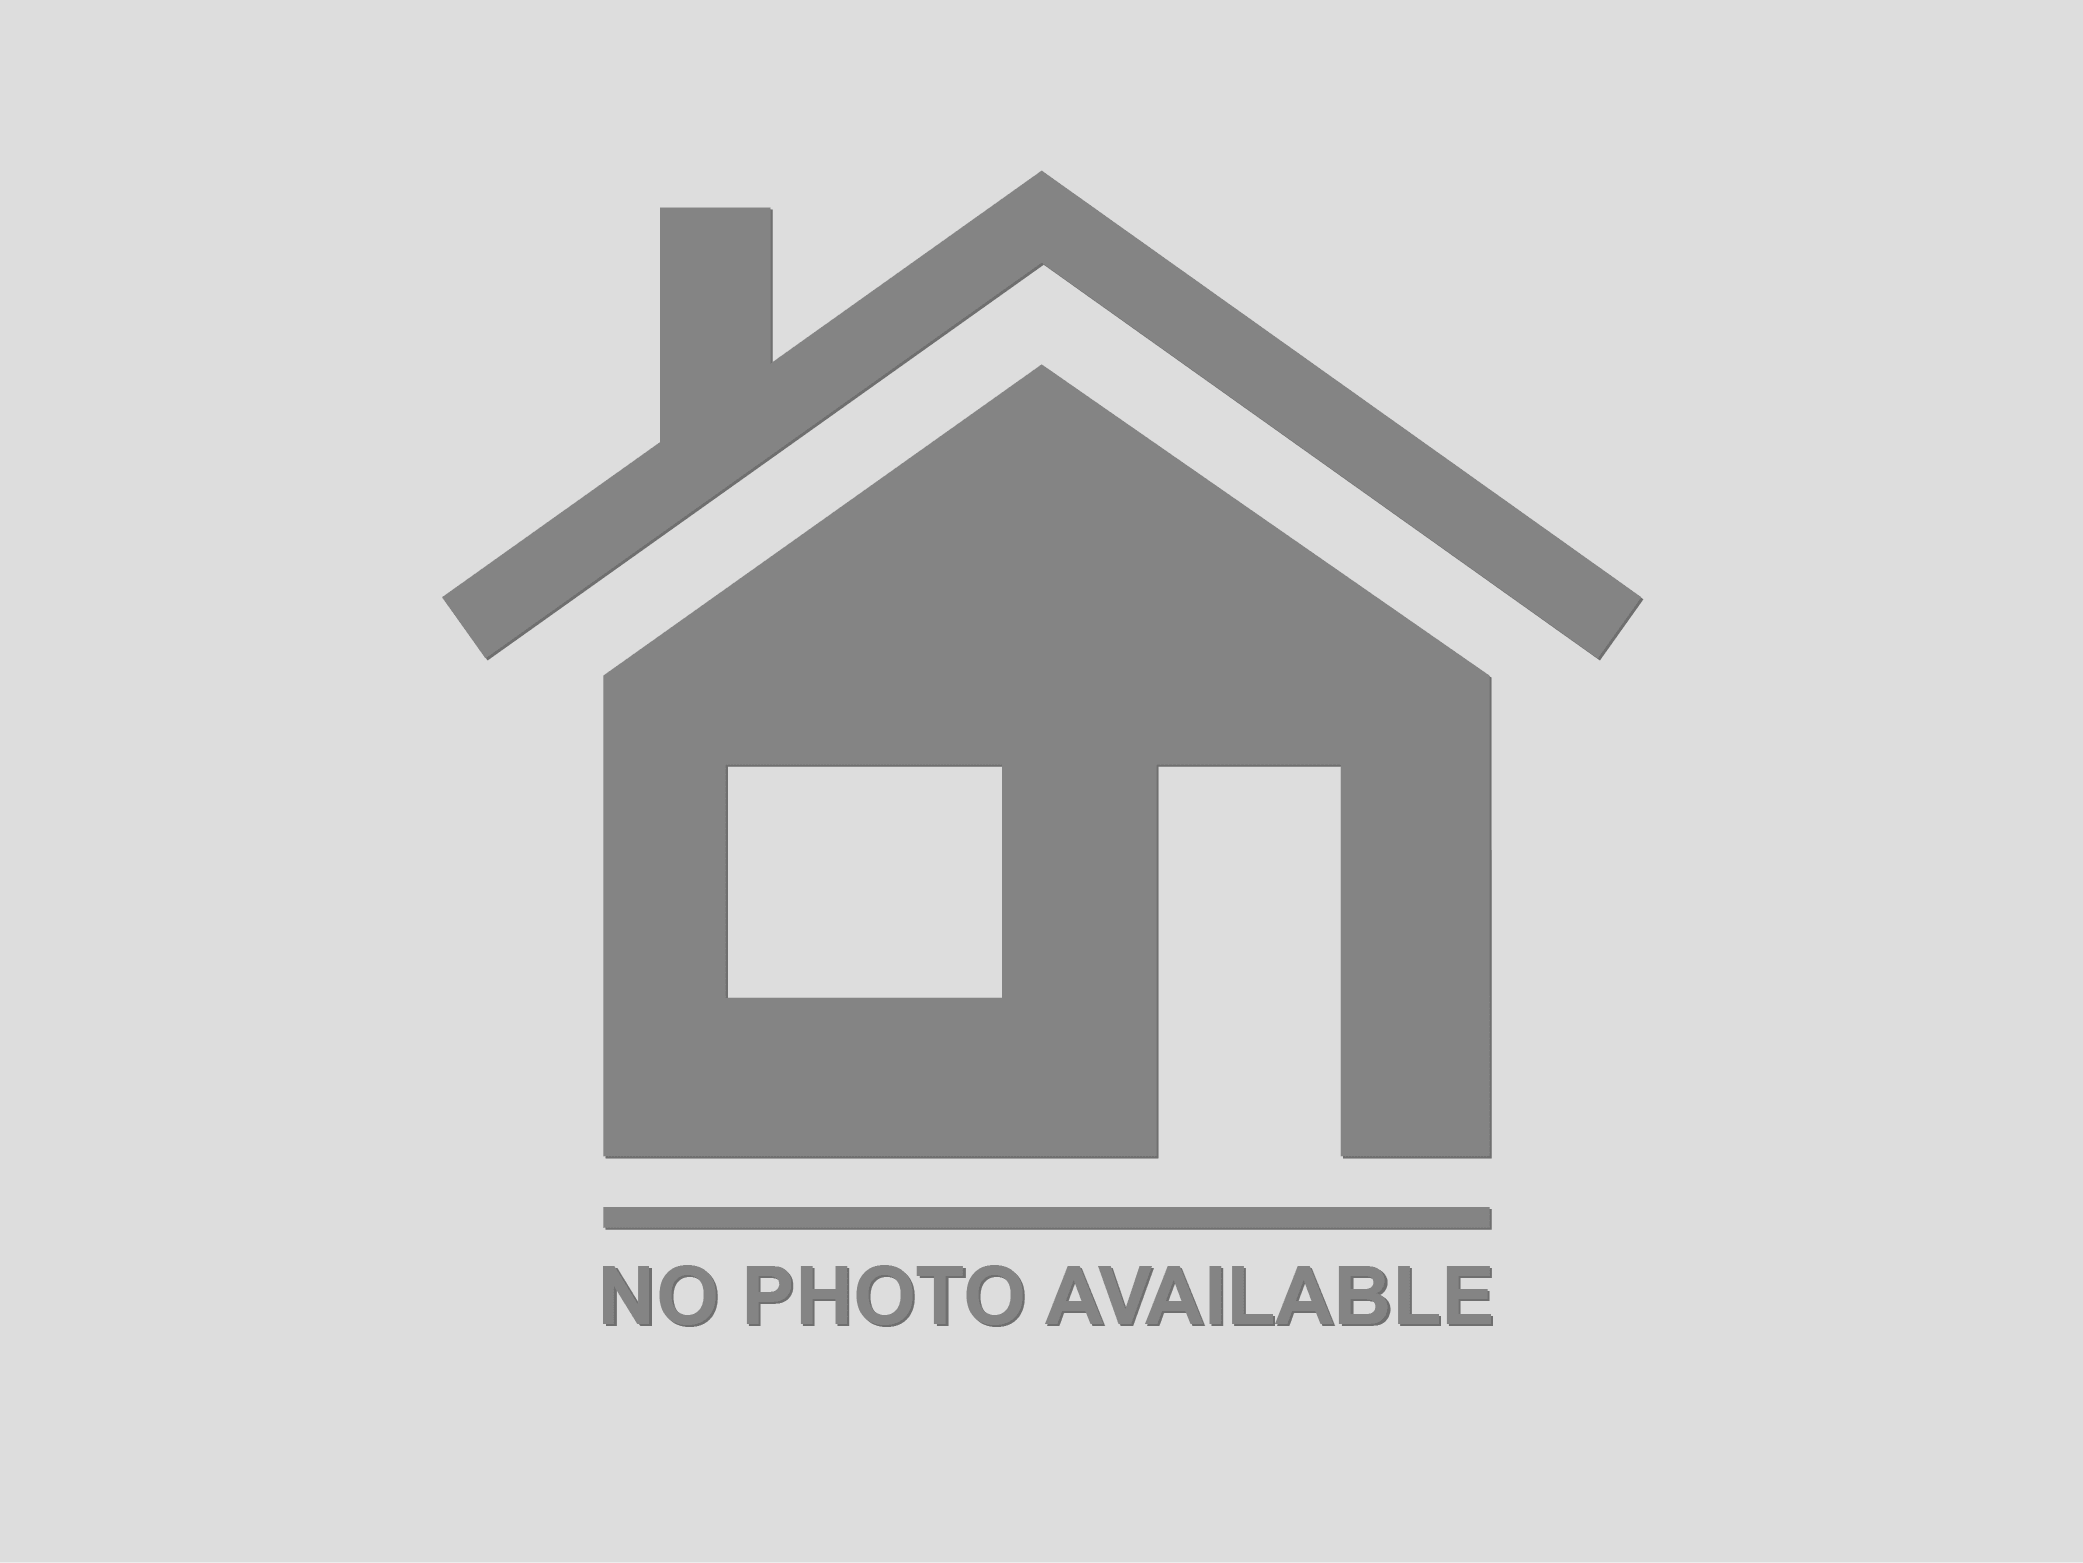 No Property Images Available